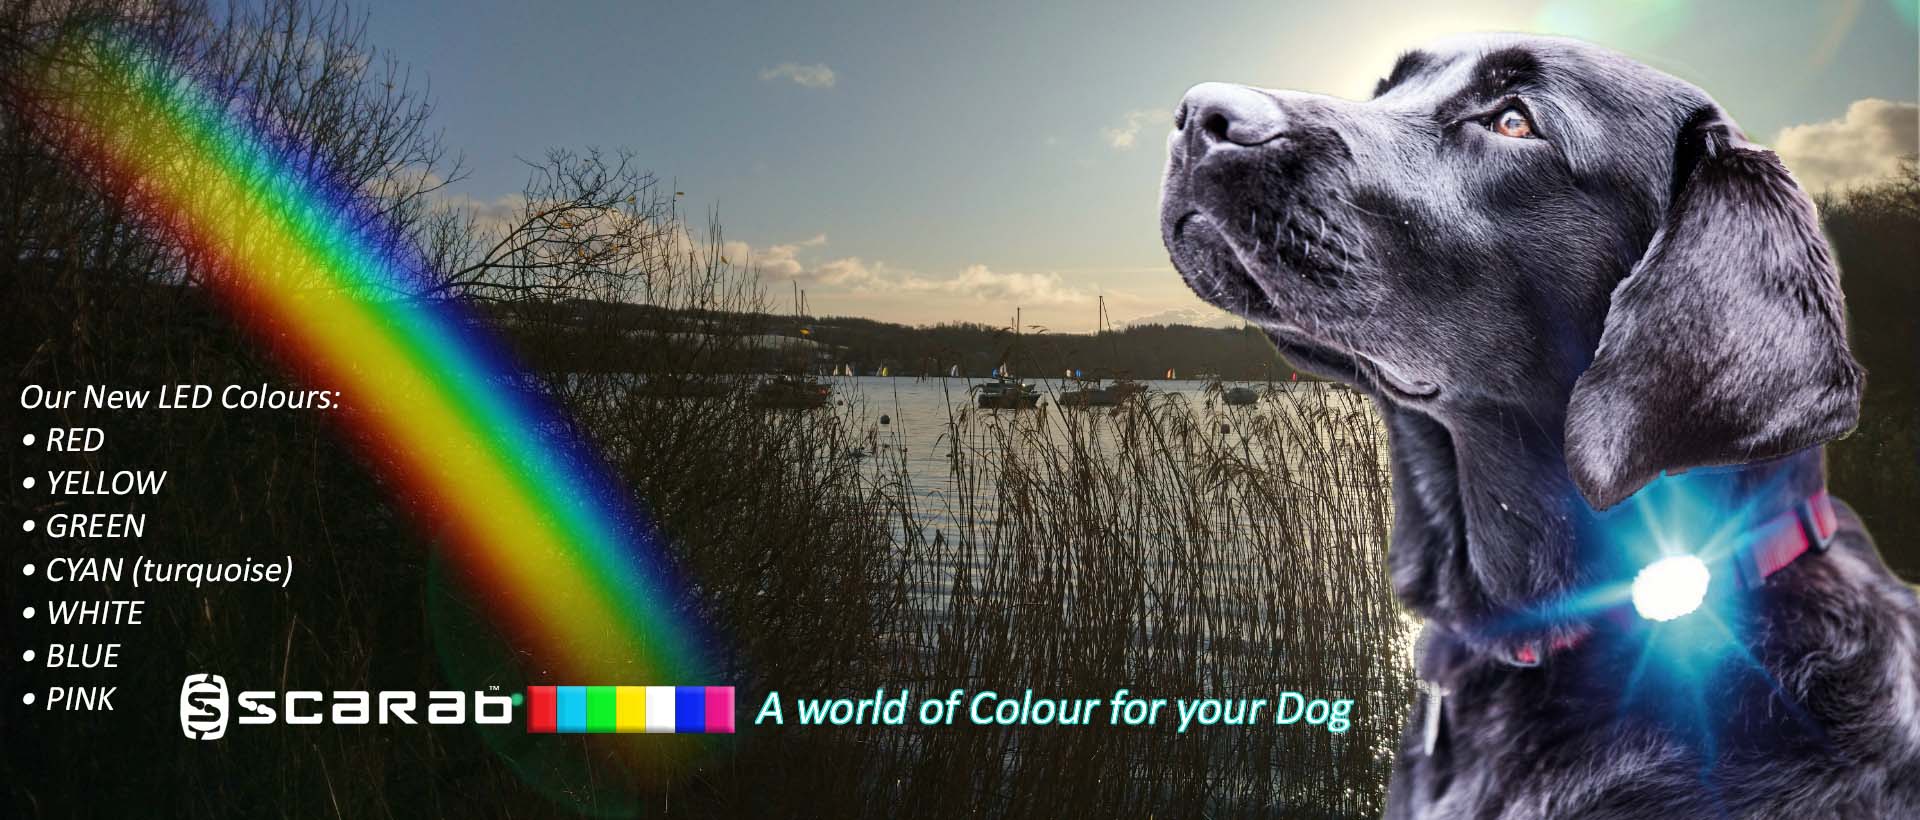 A world of Colour for your dog safety light